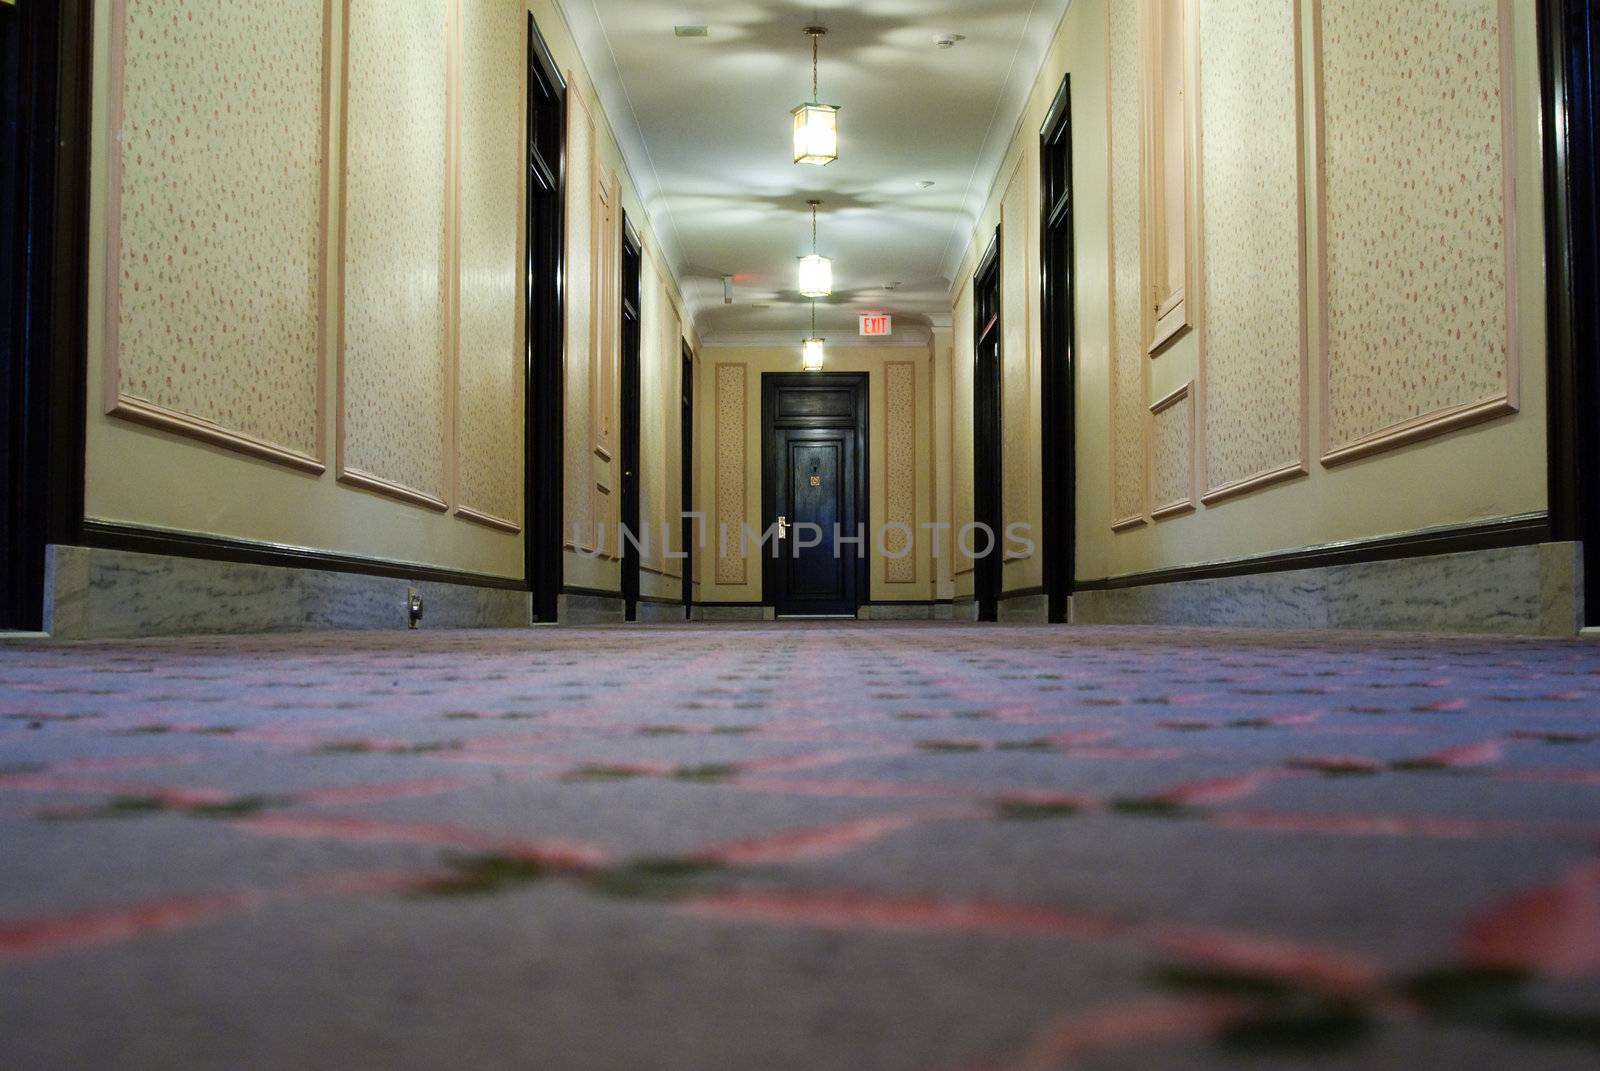 Low angle view of a hotel hallway with a doors on the side and at the end.